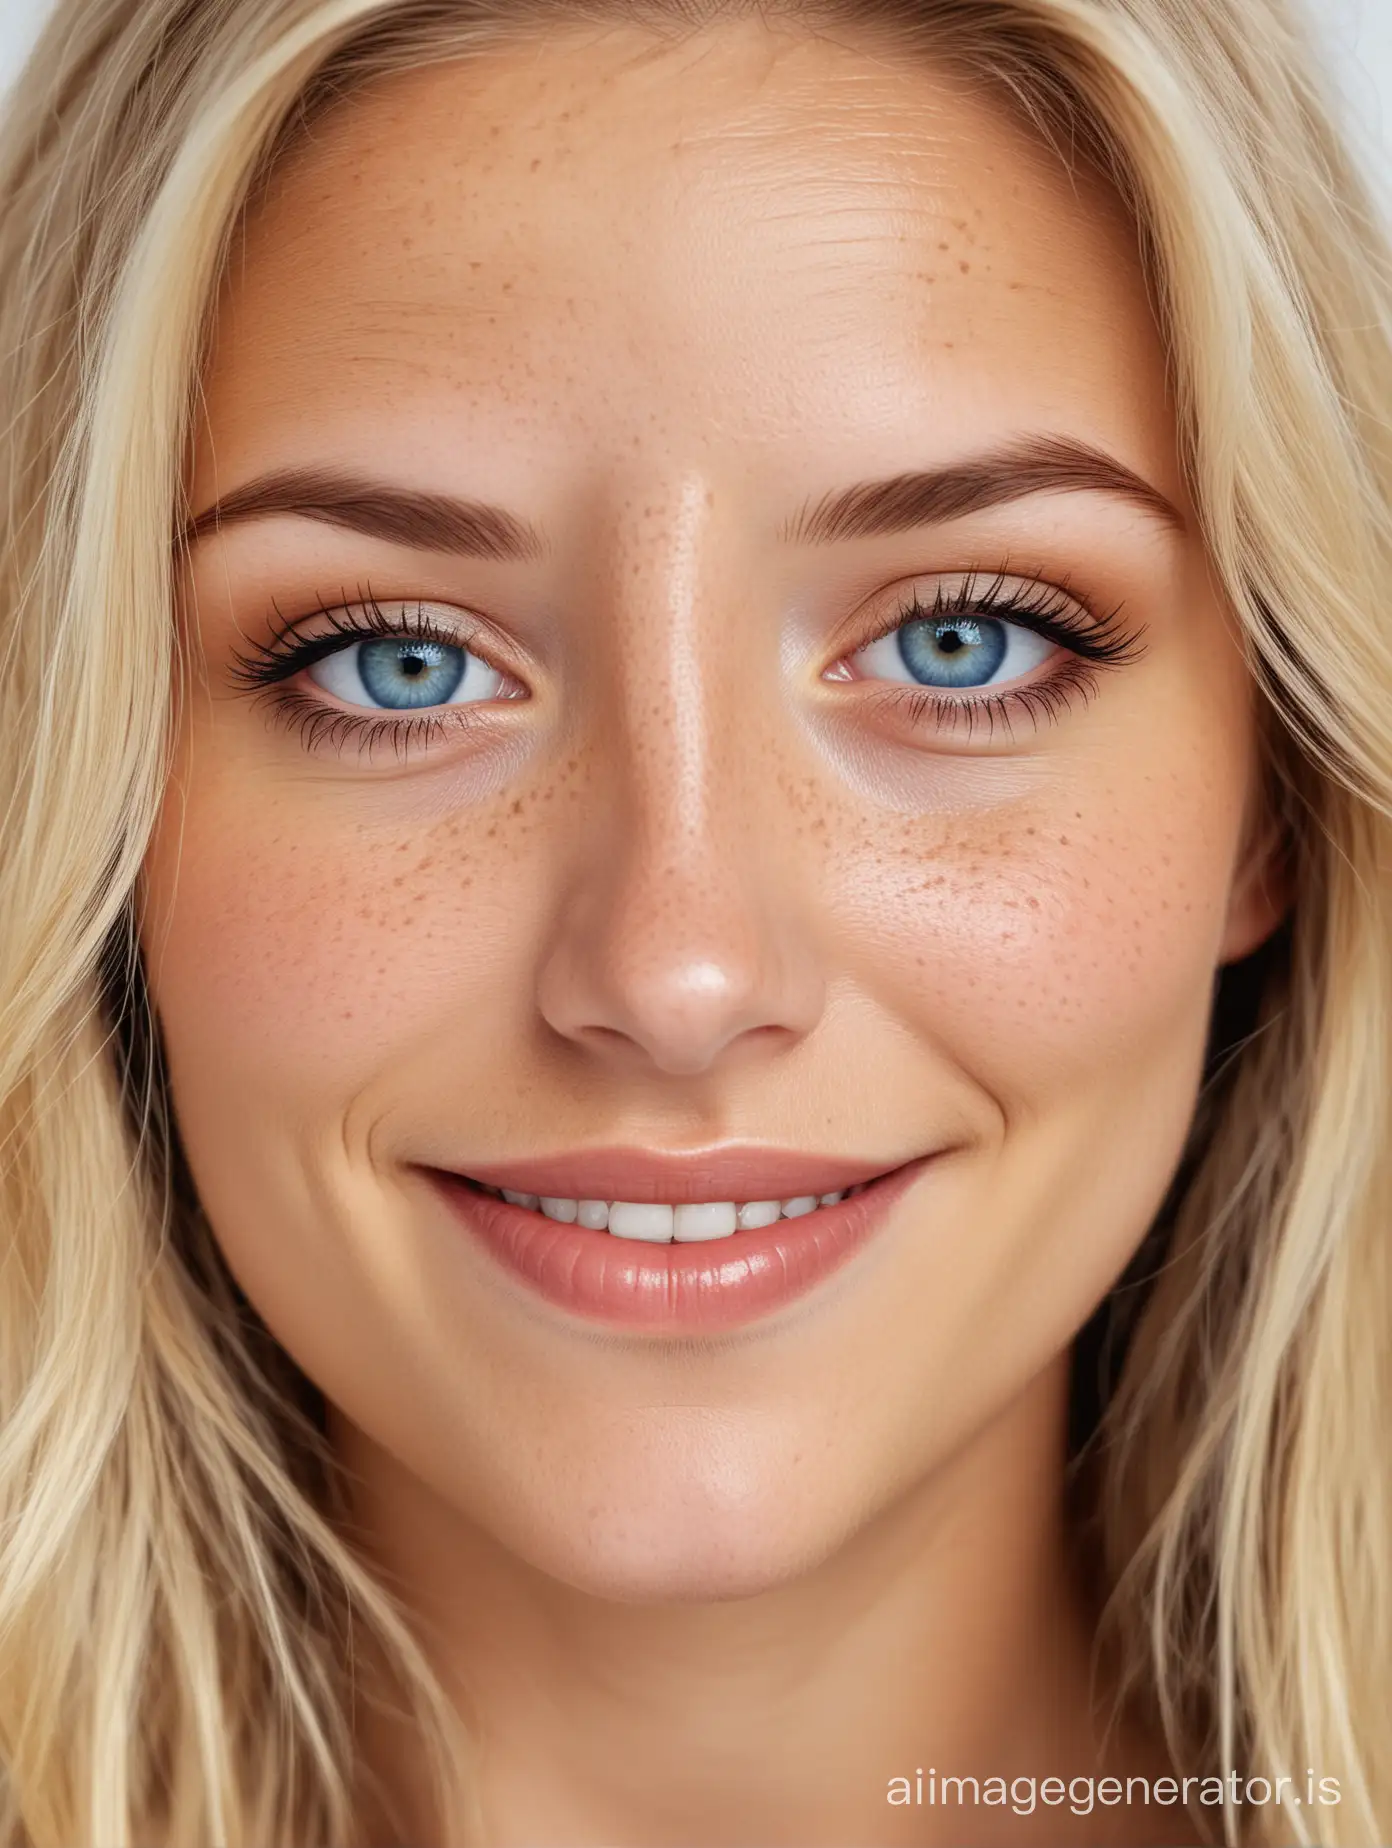 CloseUp-Portrait-of-a-Beautiful-Woman-with-Blonde-Hair-and-Blue-Eyes